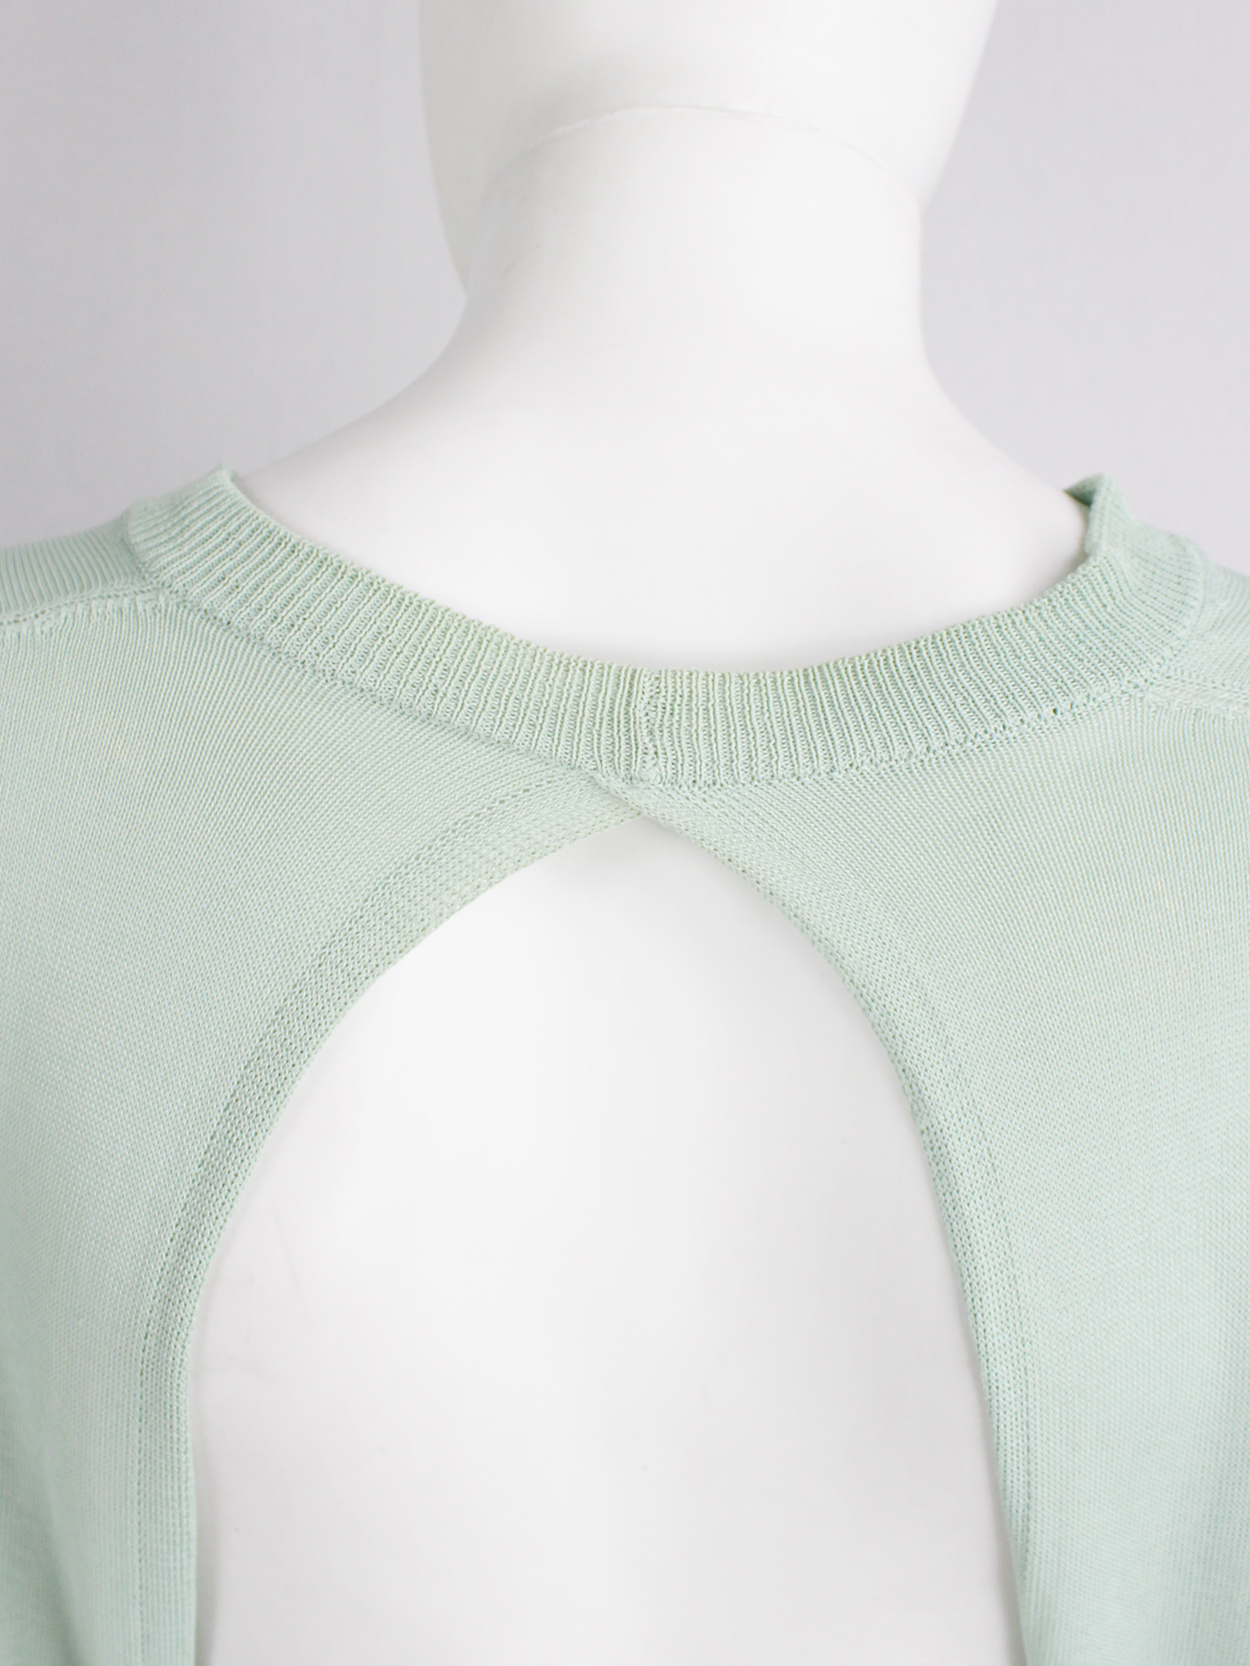 Maison Martin Margiela mint green backless top draped on the front of the body spring 2004 (14)